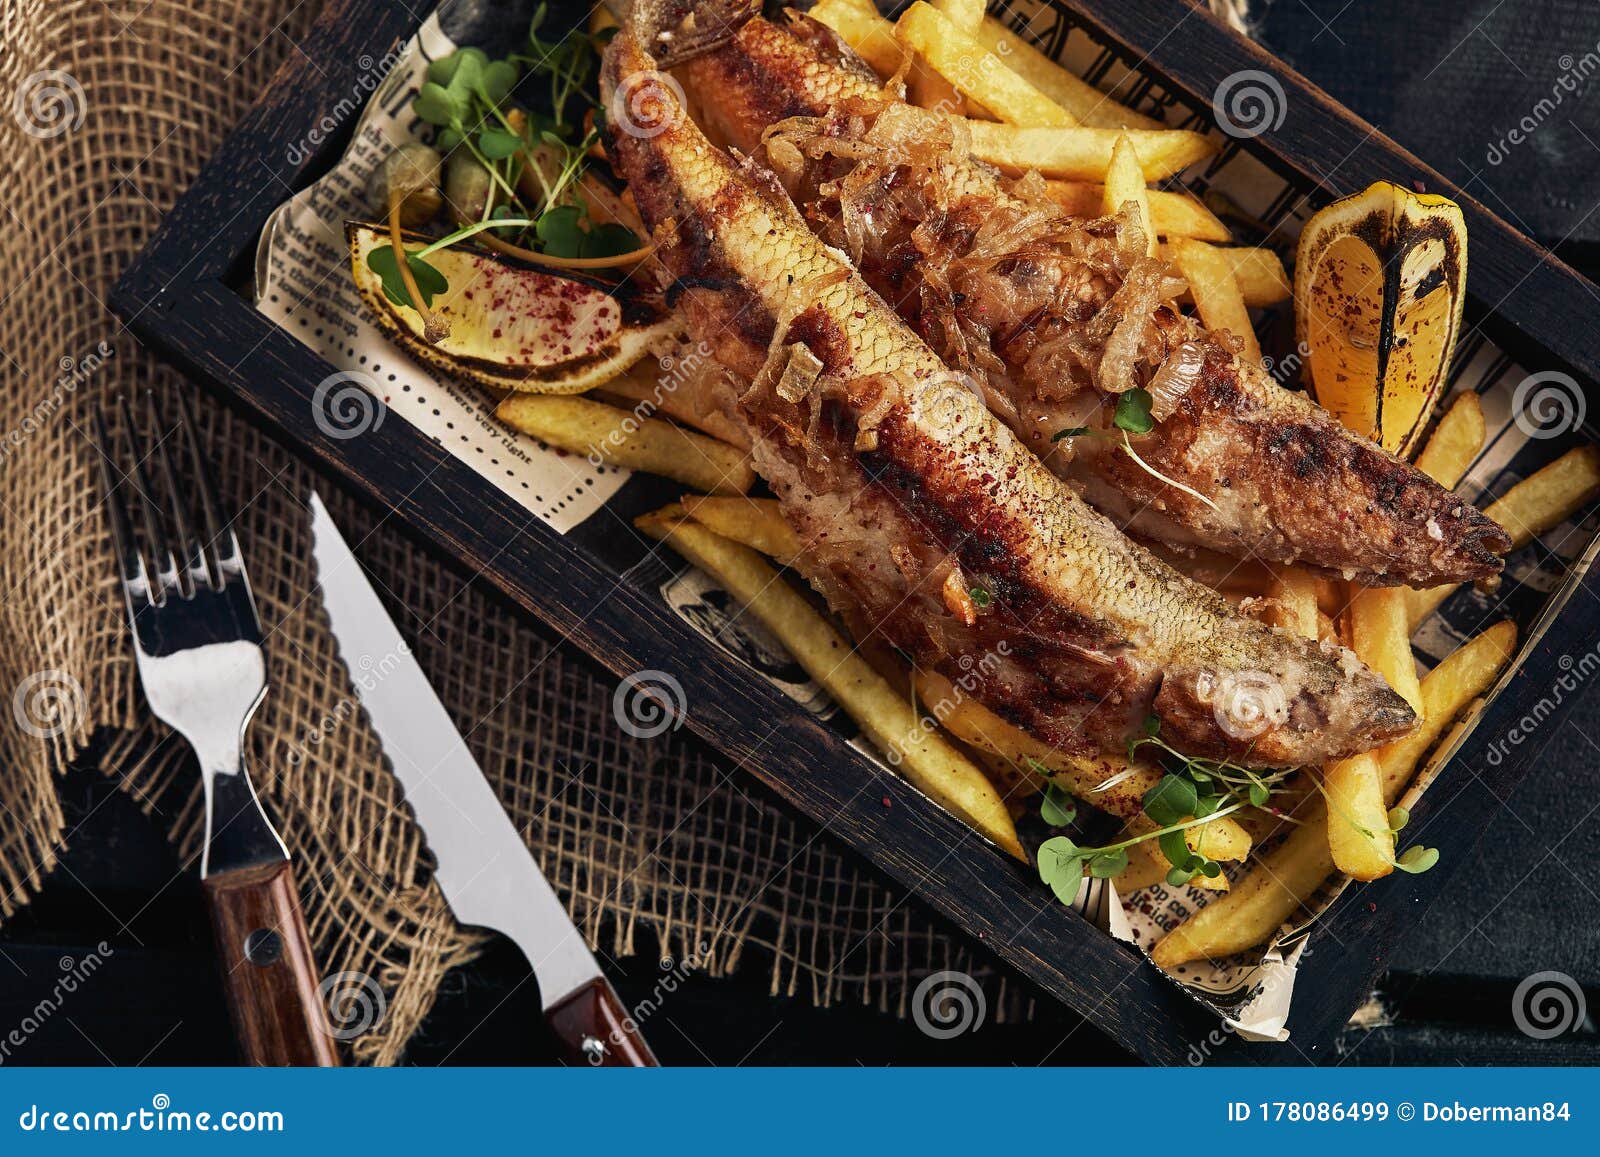 Fish And Chips Classic English Food French Fries And Fried Fish On A Wooden Board Dark Wooden Background Food Photo Stock Image Image Of Cooked British 178086499